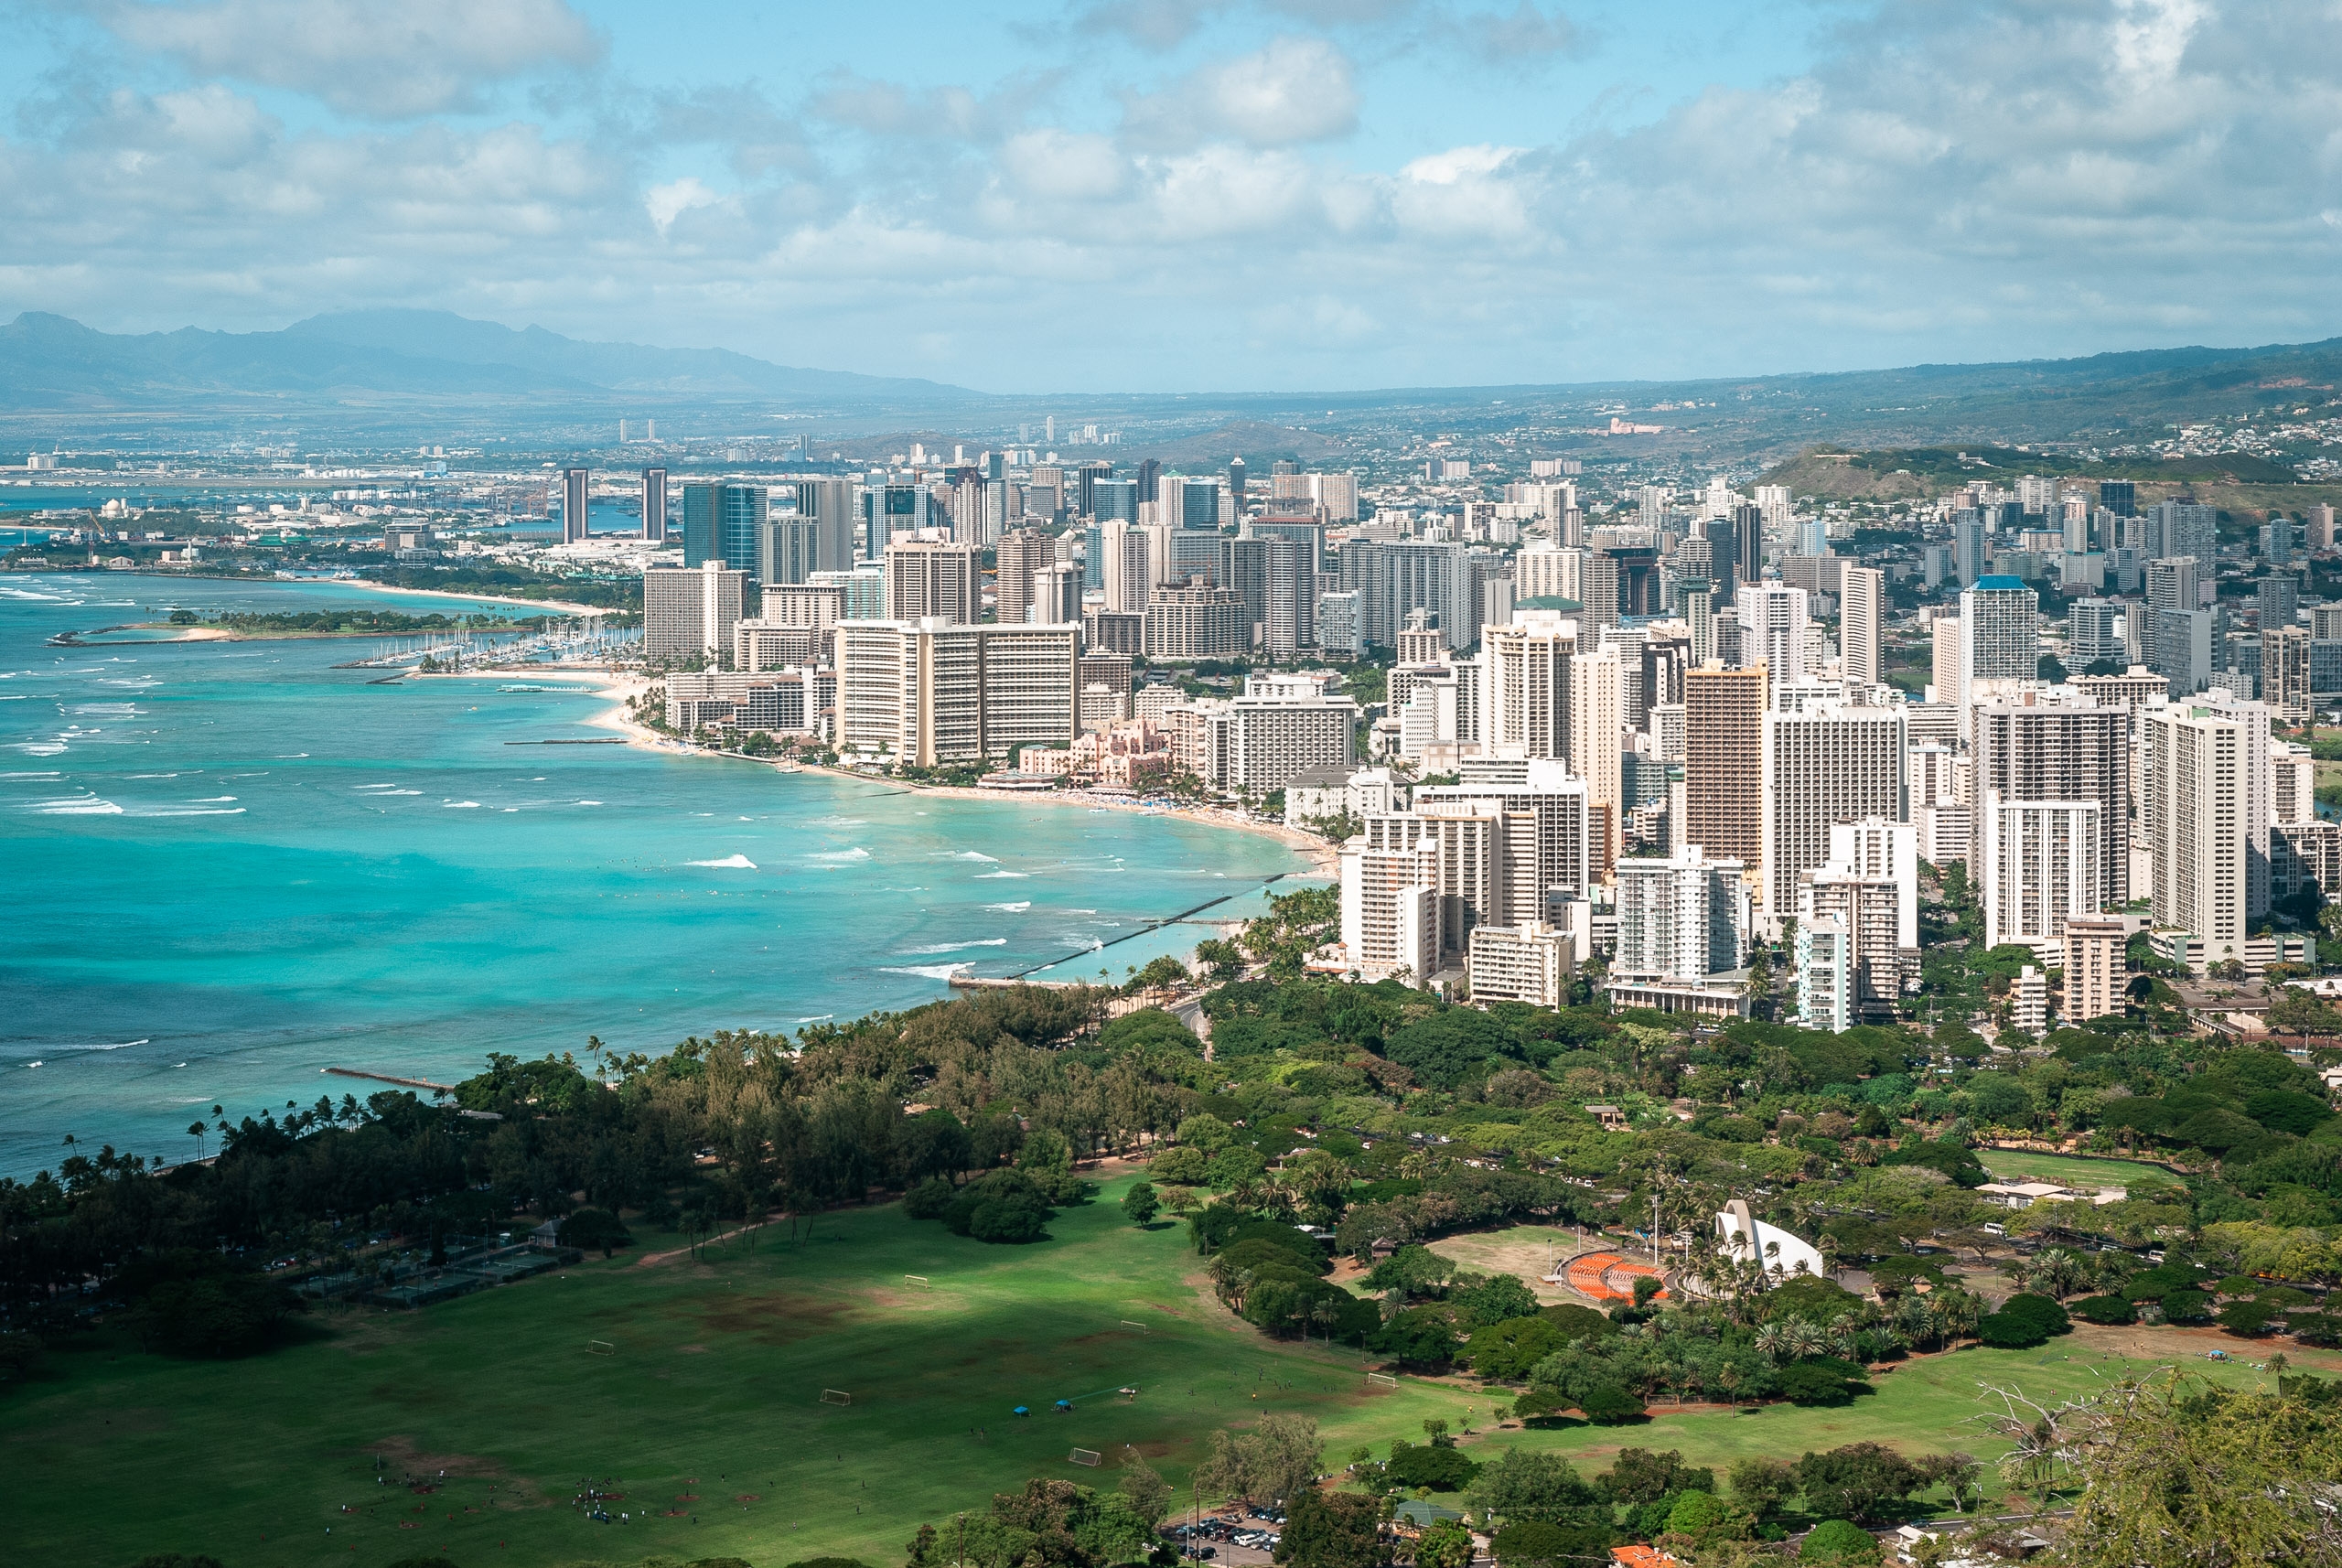 Looking out over Honolulu from the top of Diamond Head